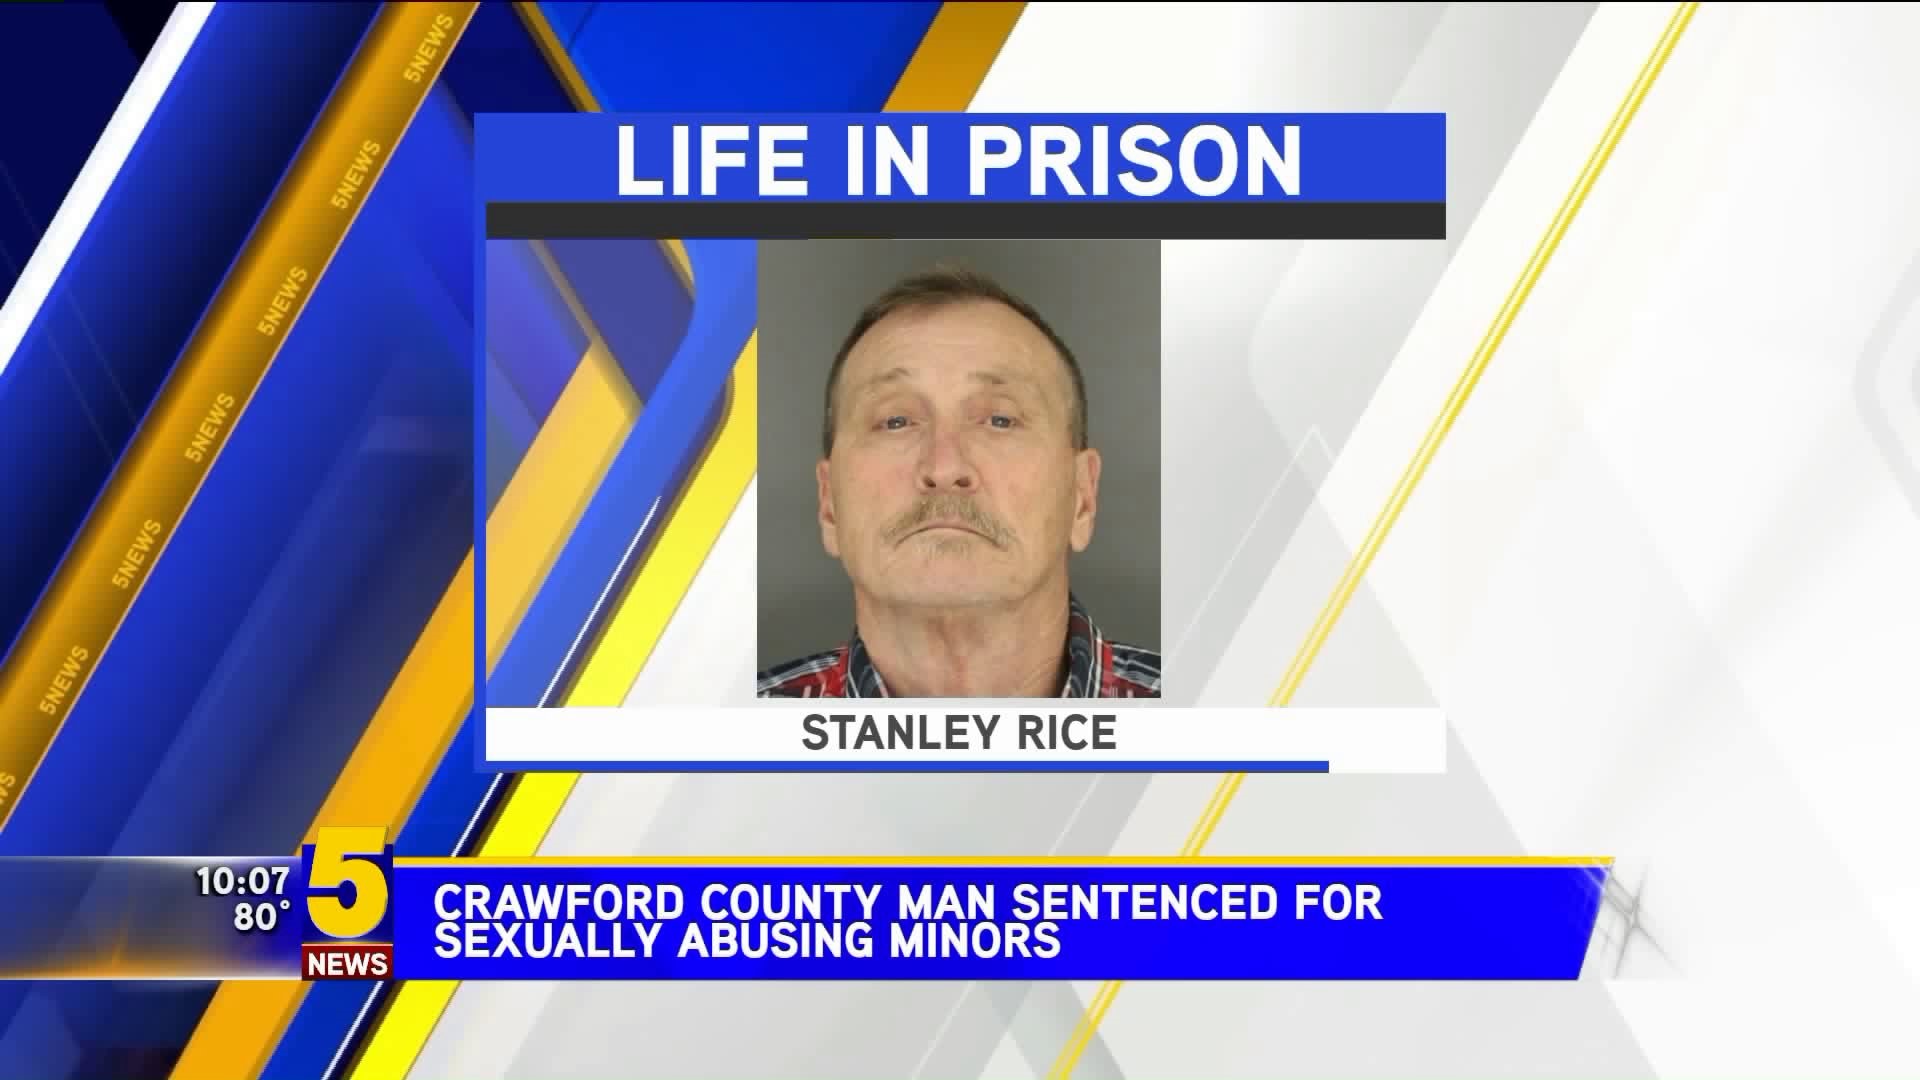 Crawford County Man Sentenced for Sexually Abusing Minors